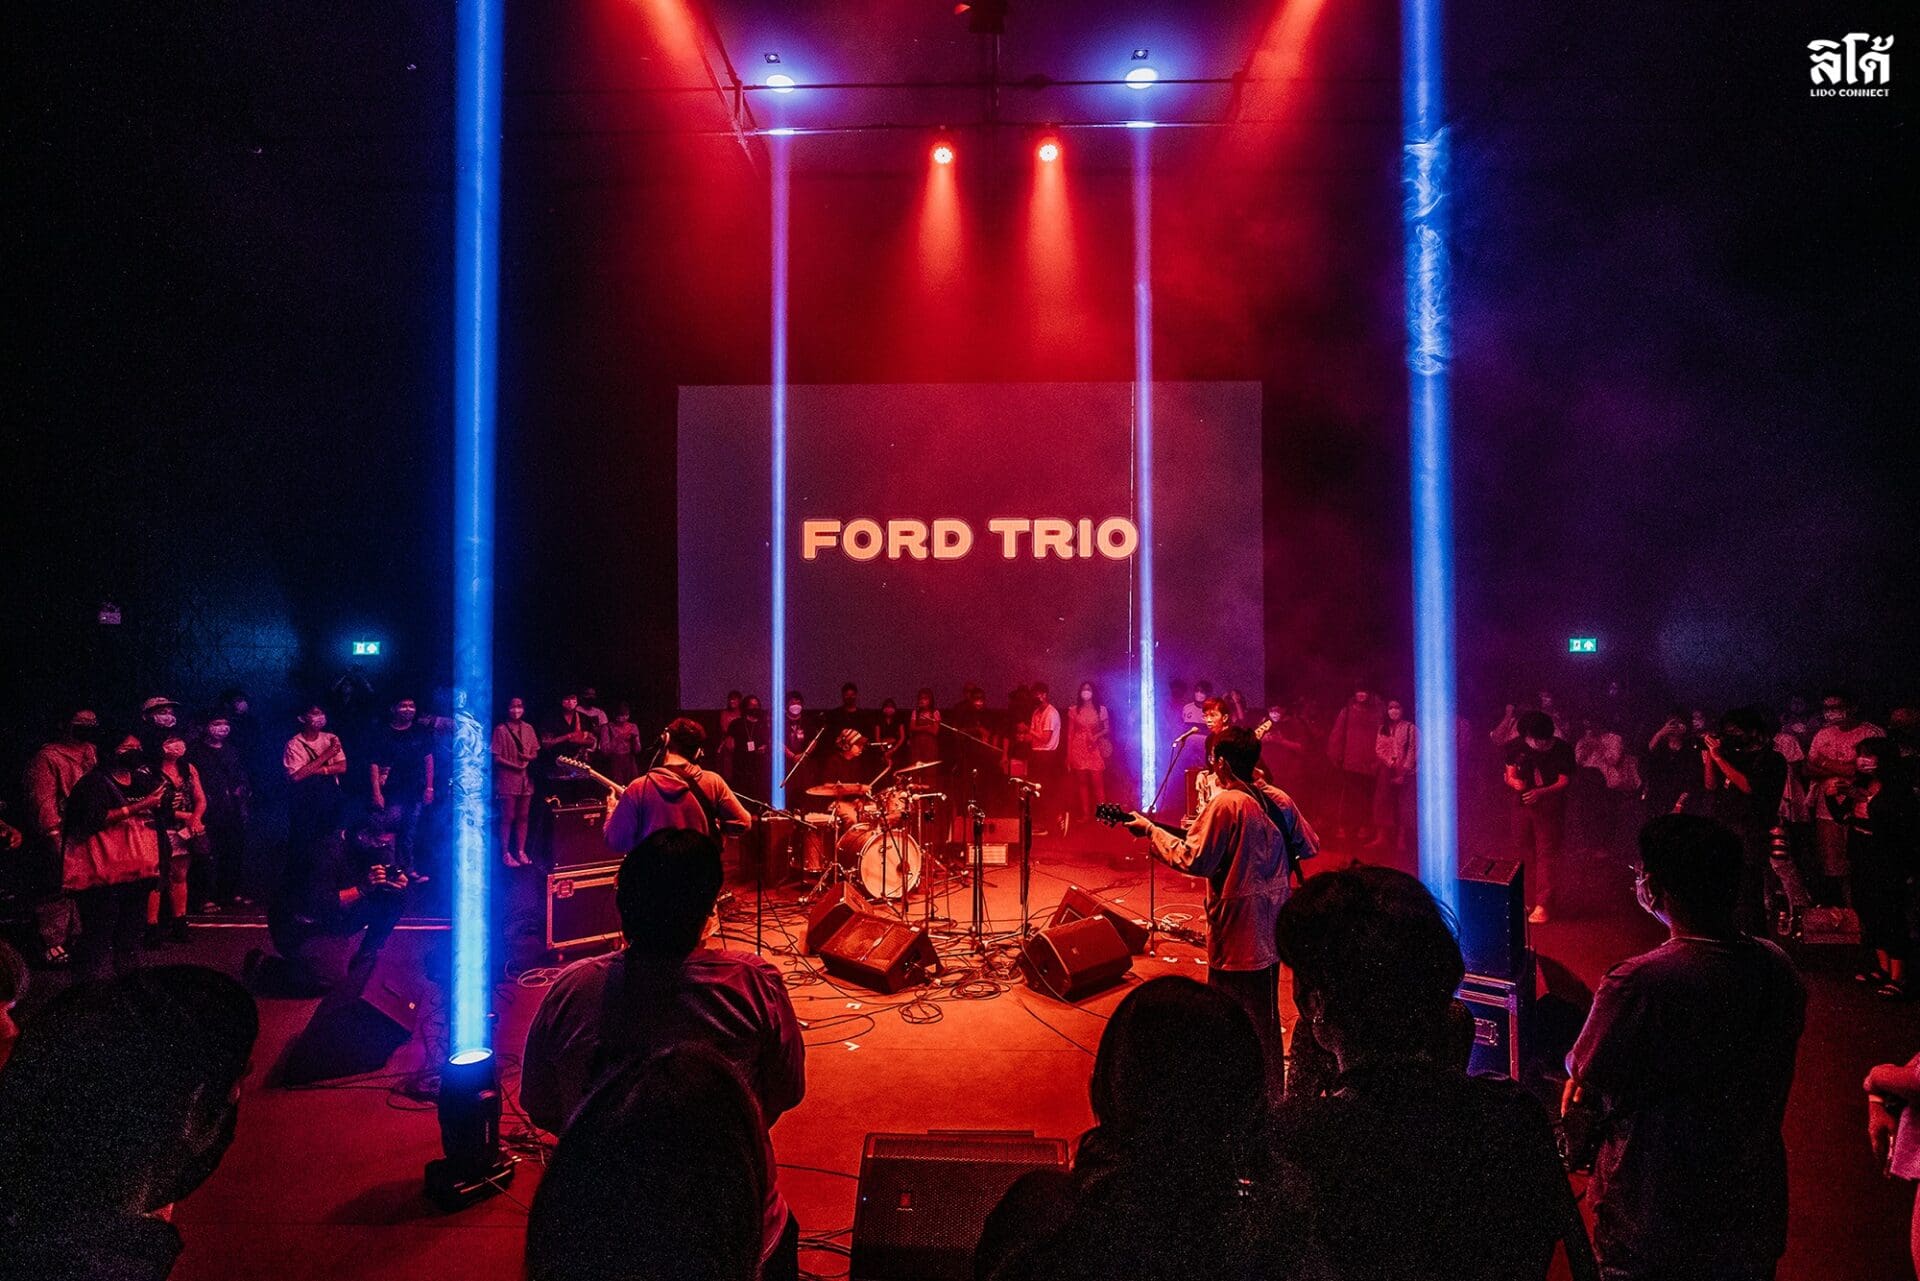 The best museums and galleries in Bangkok | a view inside the performance space of Lido Connect, where three guitarists and a drummer perform in the round, surrounded by an audience. A projection on the back of the wall says Ford Trio, and four lights create columns of blue light against a moody red ambiance.